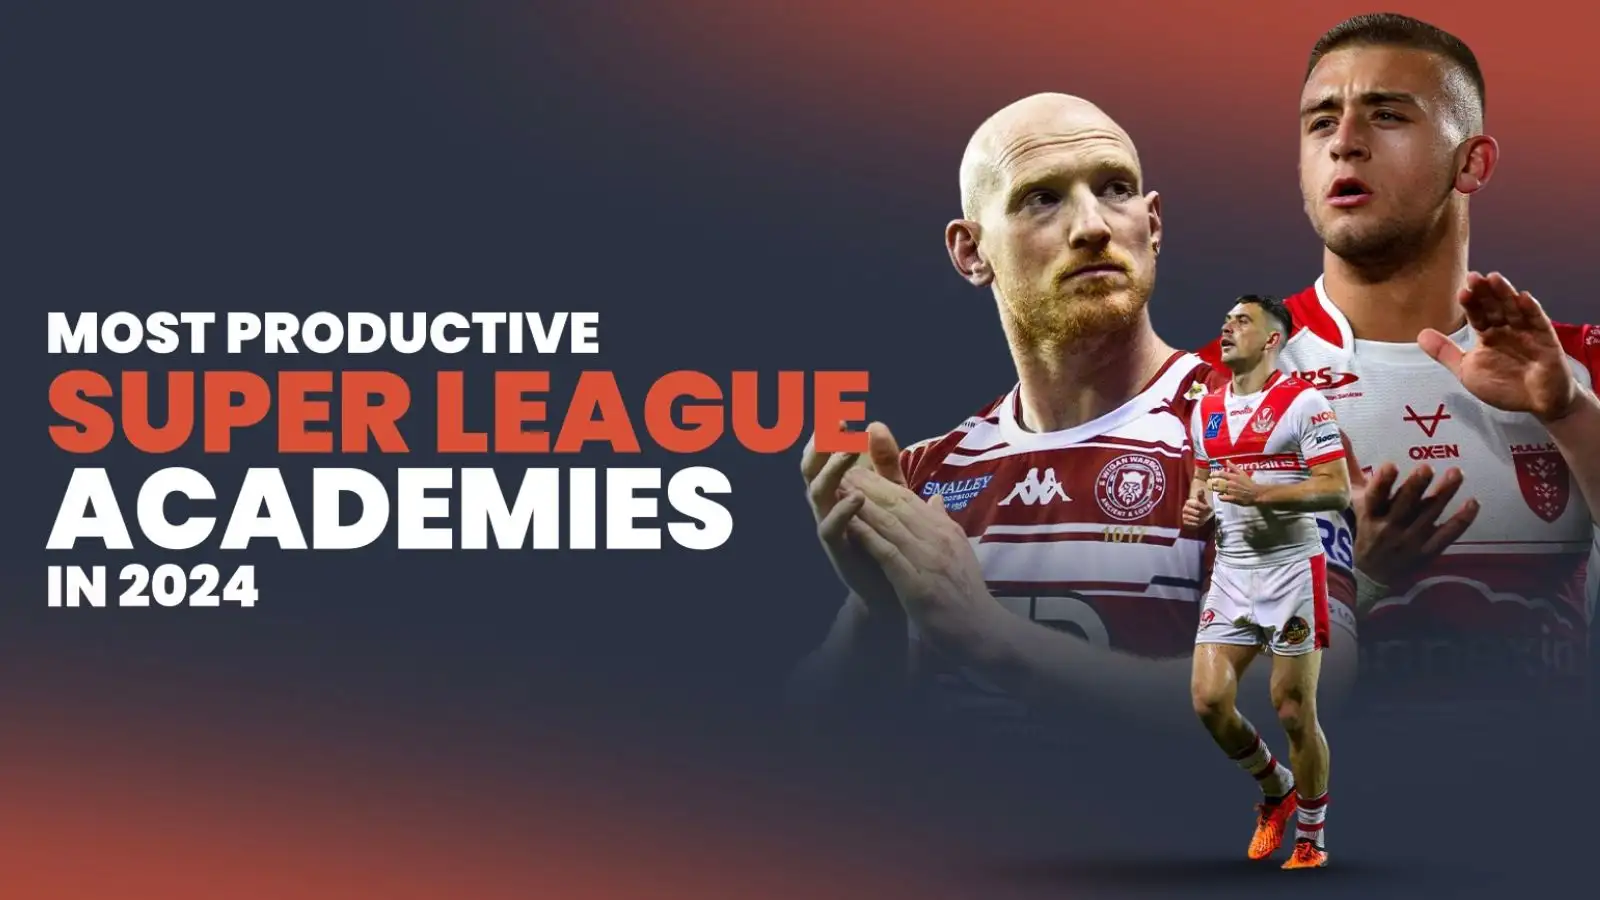 'Most Productive Super League Academies in 2024', Liam Farrell, Mikey Lewis, Lewis Dodd